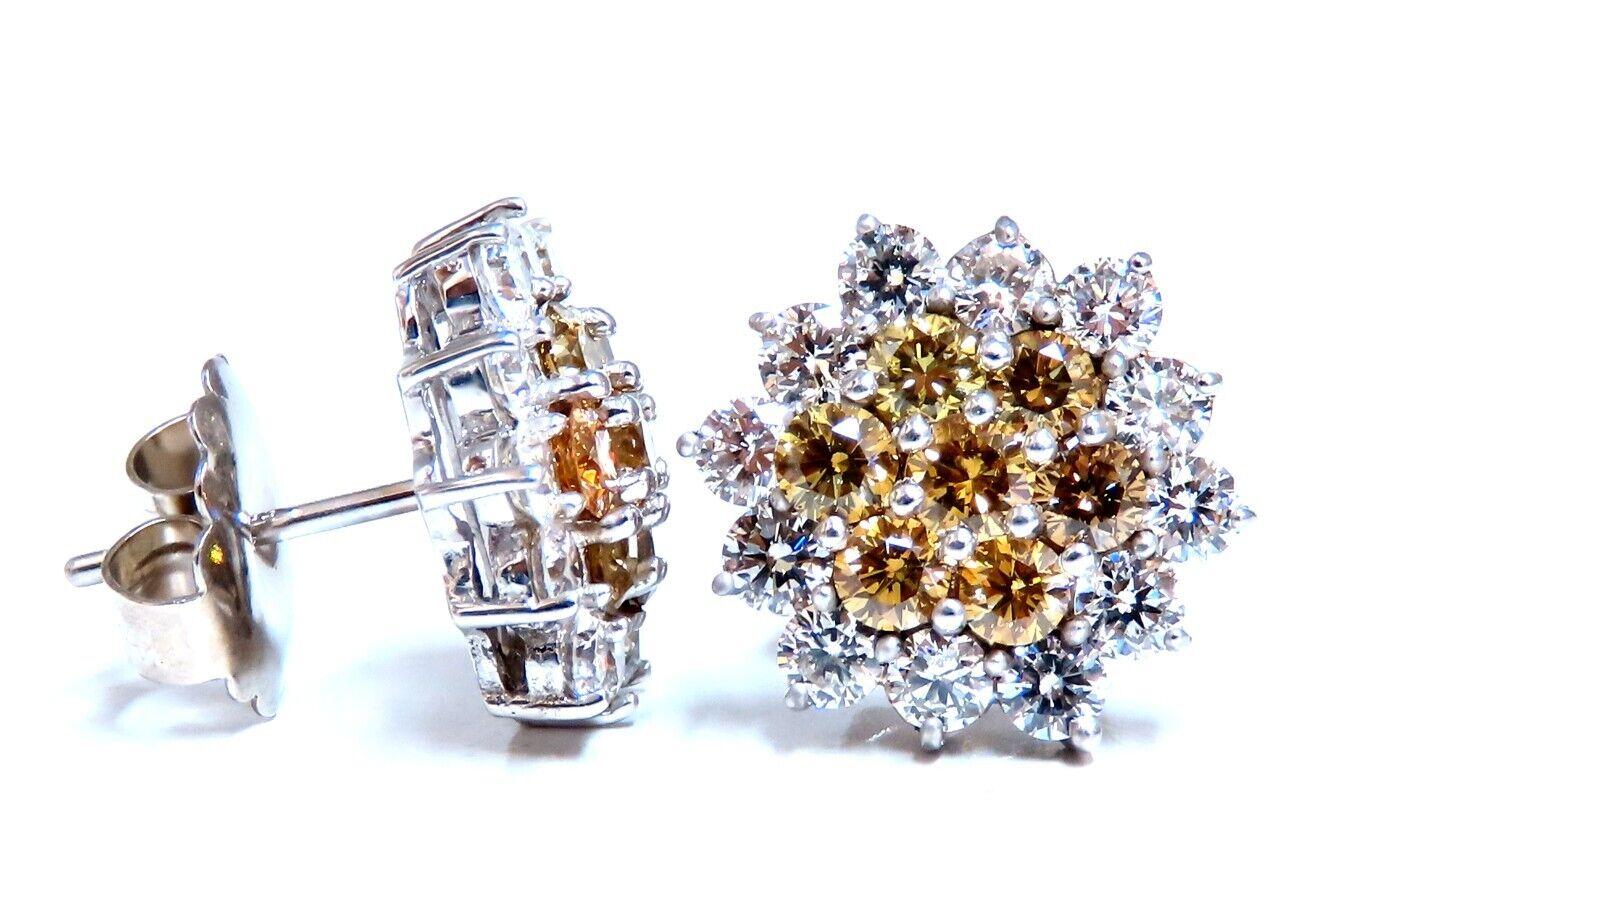 Cluster Stud Earrings

2.14ct. Natural White Diamonds

 Rounds, full cuts

G-color, Vs-2 clarity.

1.66ct Natural Yellow Orange Brown diamonds.

Vs-2 Si-1 Clarity

Overall: .50 Inch wide

14kt. white gold. 

comfortable and secure butterfly